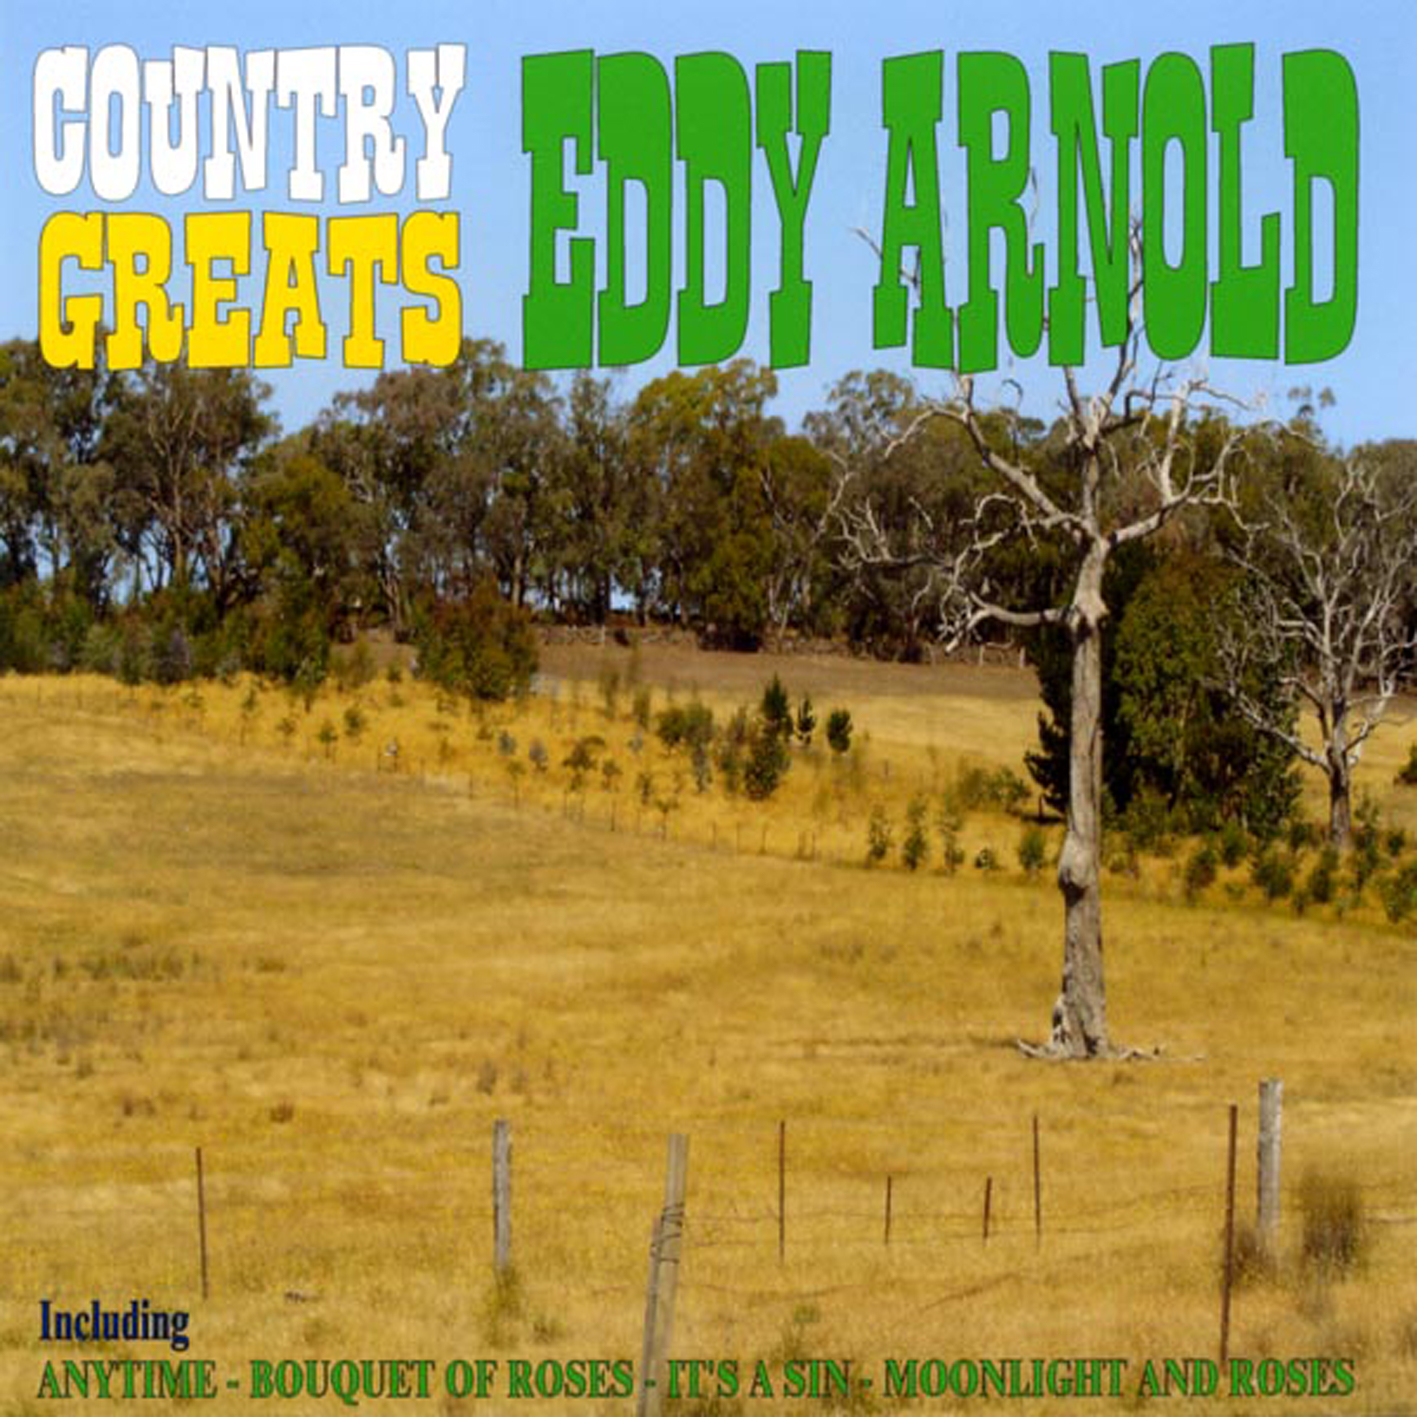 Country Greats - Eddy Arnold